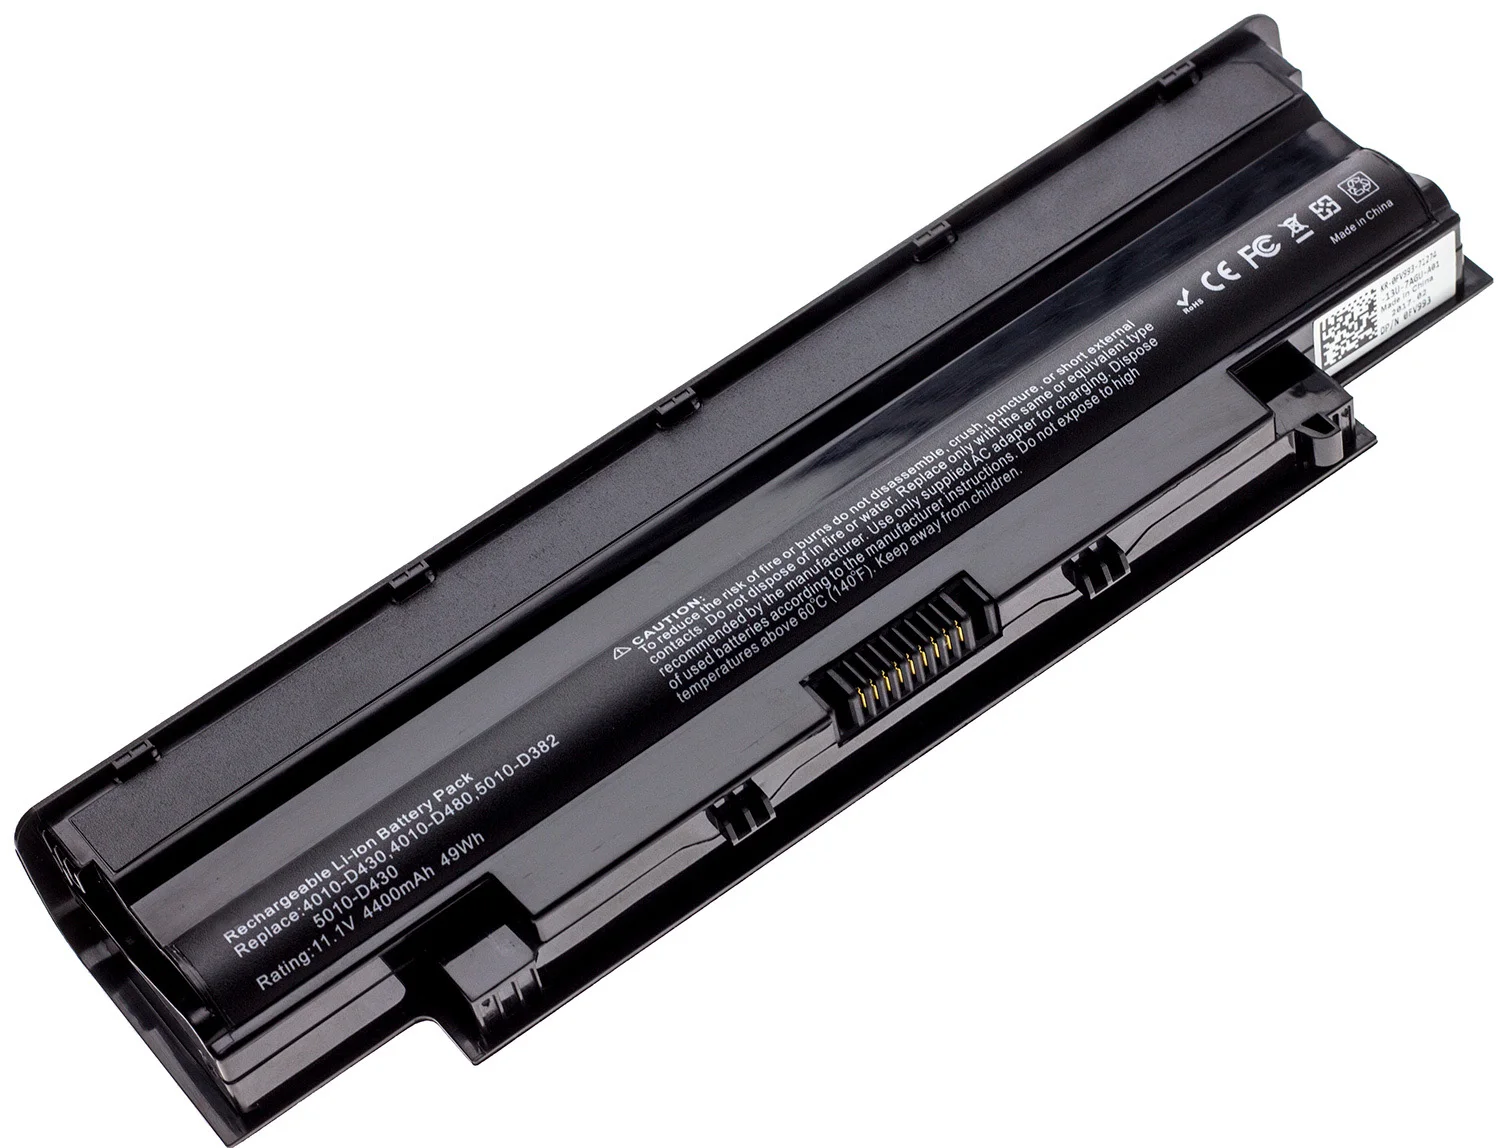 

J1KND 04YRJH Laptop Battery for Dell Inspiron M501 N4010 13R 14R 15R 17R Series Vostro 3450 3550 3750